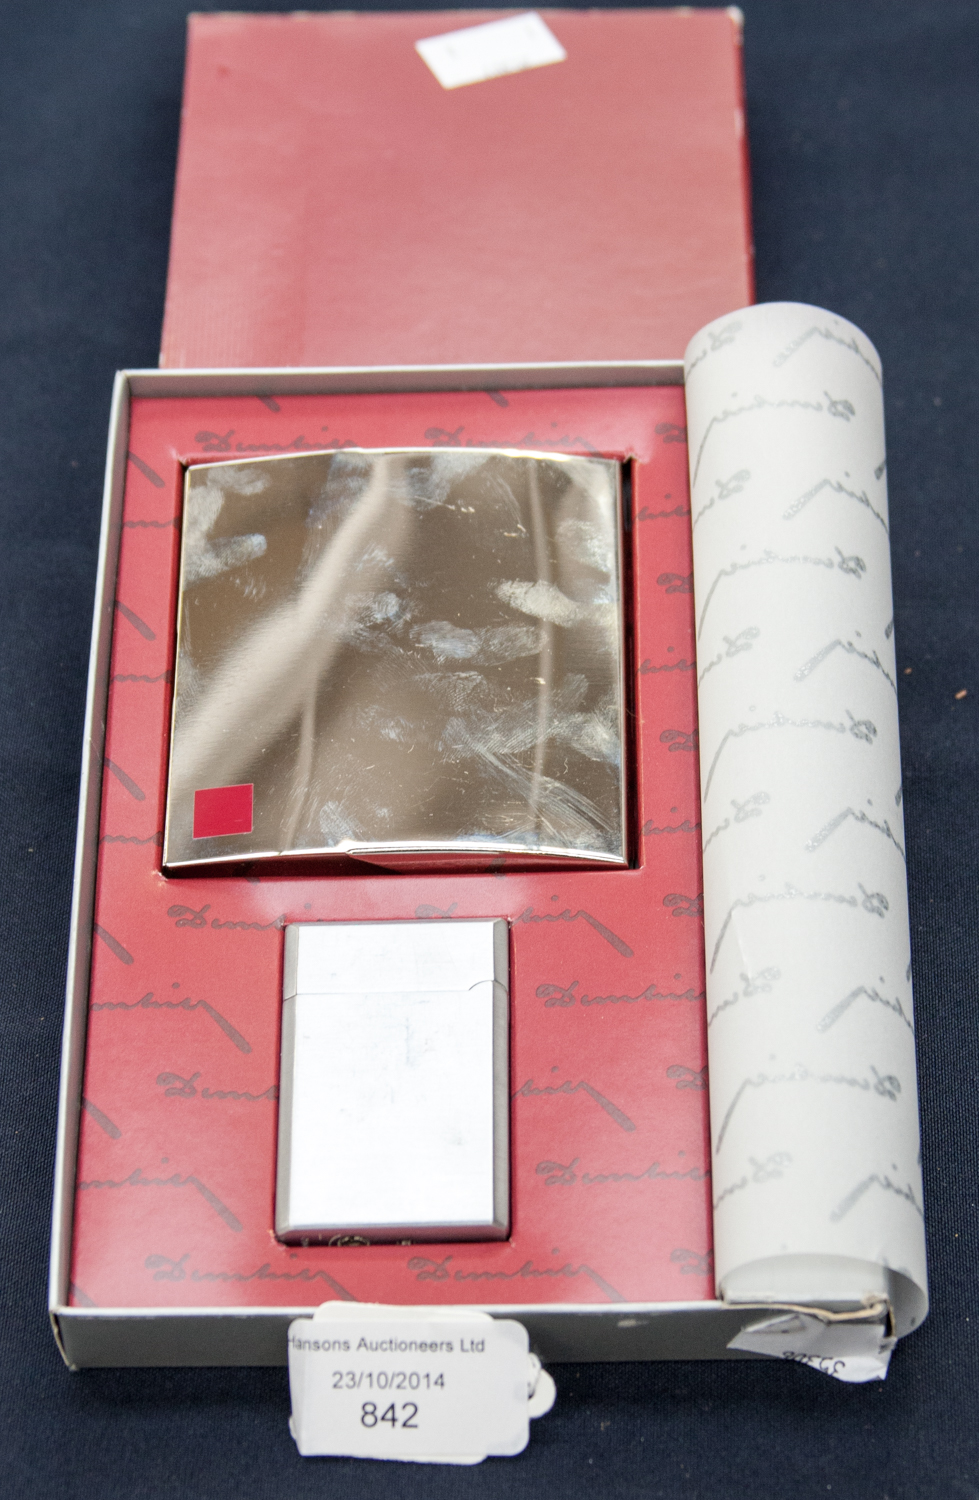 A Dunhill stainless steel lighter and cigarette case in original card packaging, circa 1990